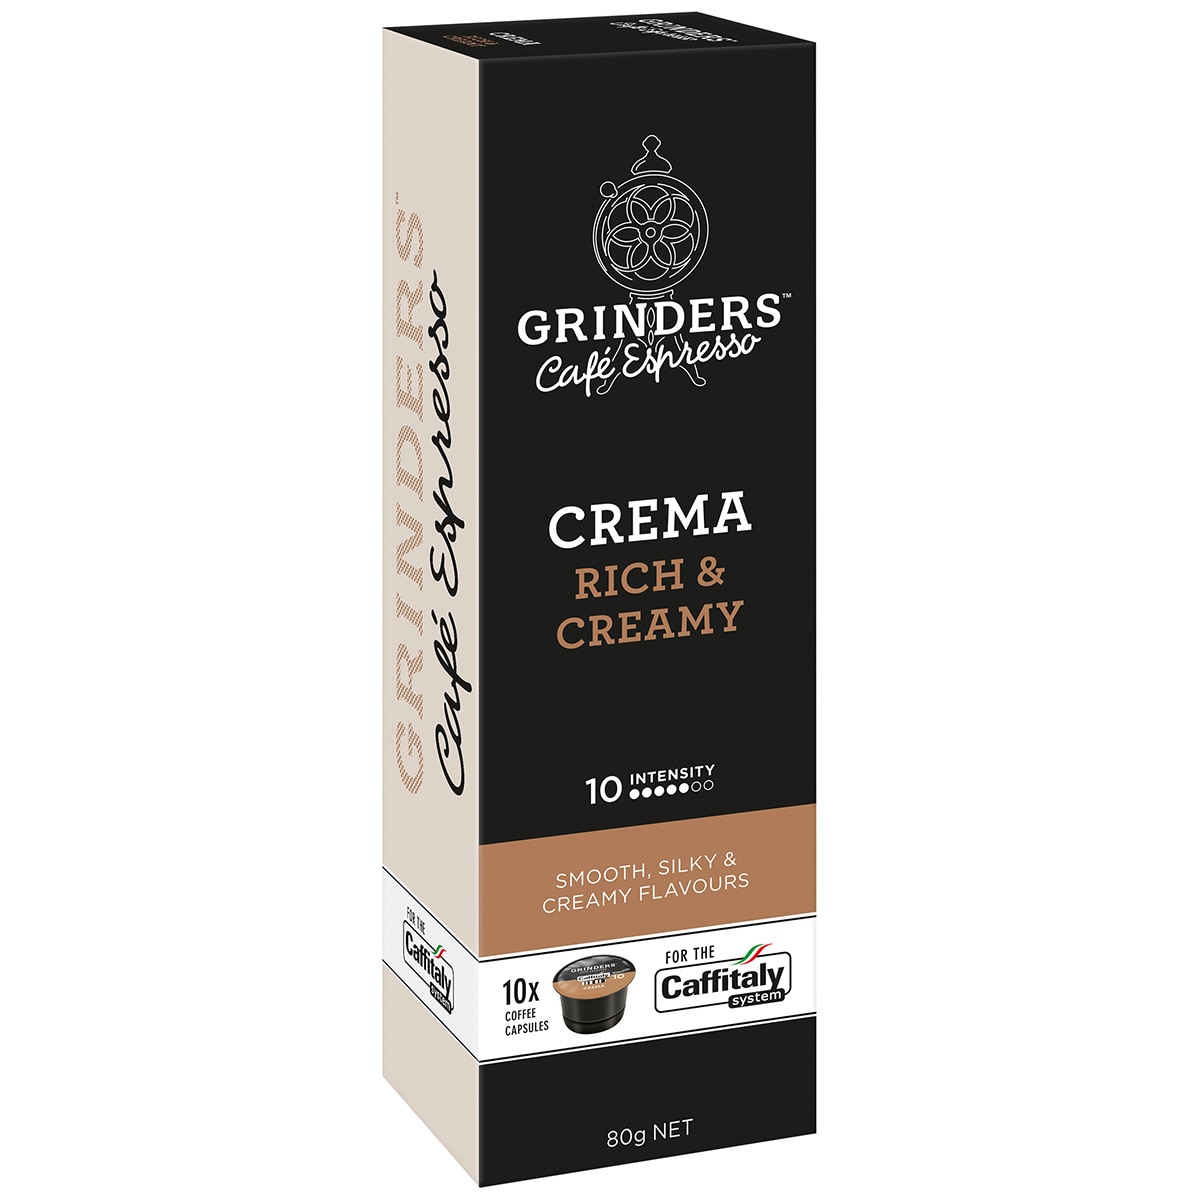 Grinders Caffitaly caps Crema